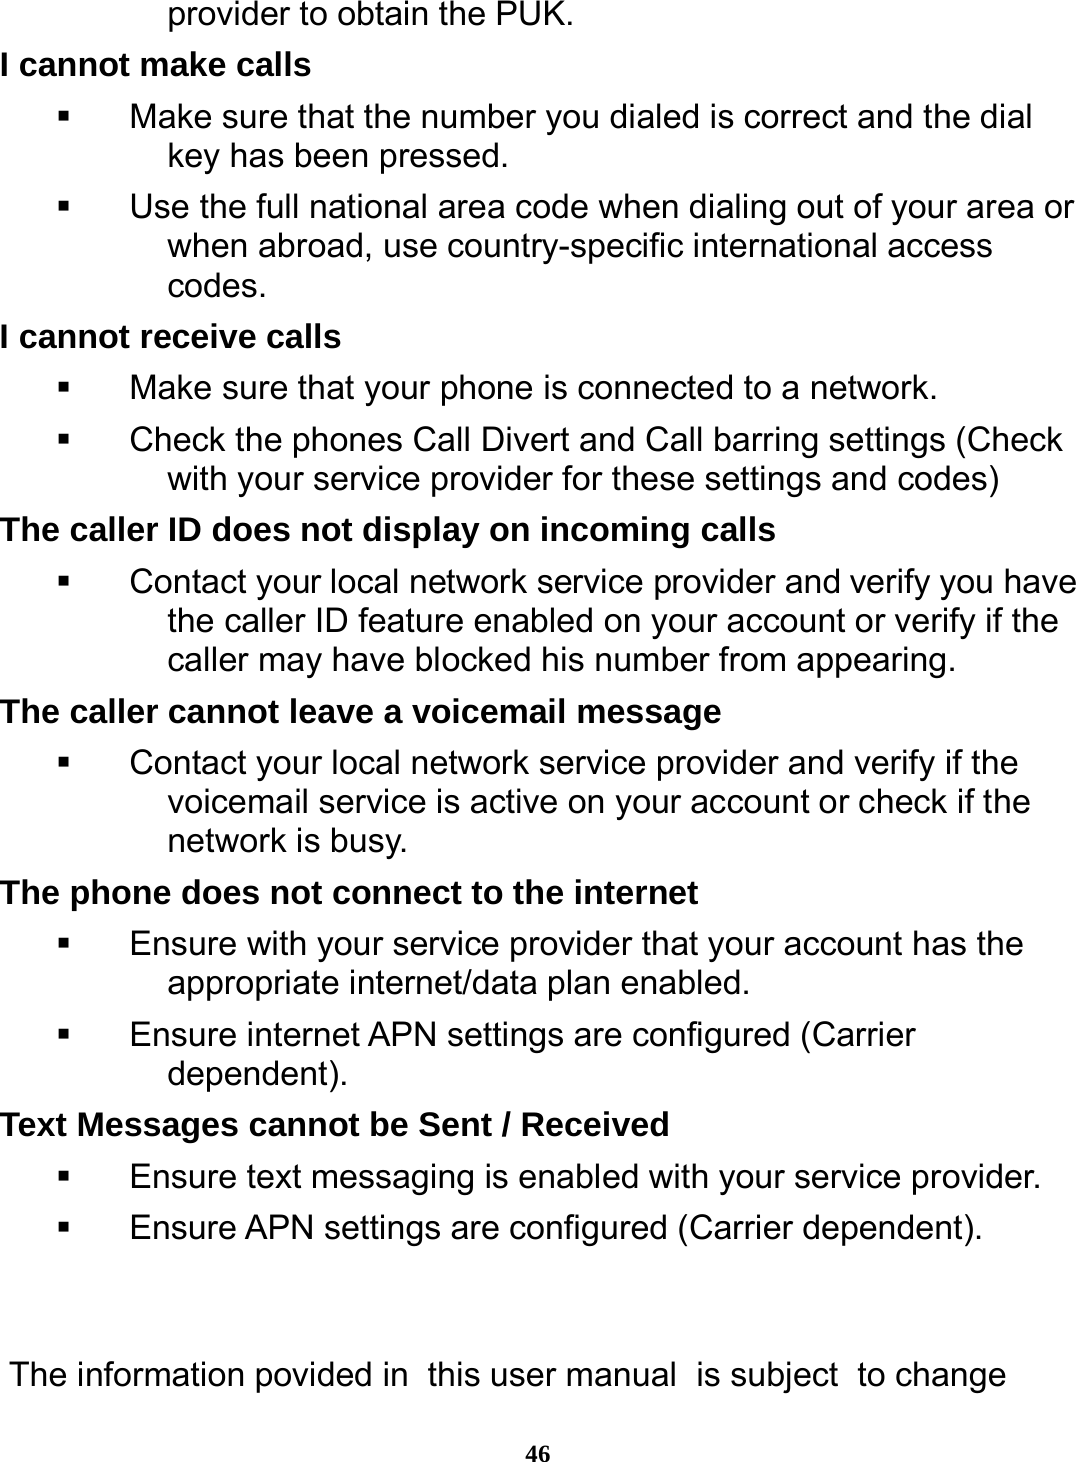  46 provider to obtain the PUK. I cannot make calls   Make sure that the number you dialed is correct and the dial key has been pressed.   Use the full national area code when dialing out of your area or when abroad, use country-specific international access codes. I cannot receive calls   Make sure that your phone is connected to a network.   Check the phones Call Divert and Call barring settings (Check with your service provider for these settings and codes) The caller ID does not display on incoming calls   Contact your local network service provider and verify you have the caller ID feature enabled on your account or verify if the caller may have blocked his number from appearing. The caller cannot leave a voicemail message   Contact your local network service provider and verify if the voicemail service is active on your account or check if the network is busy. The phone does not connect to the internet   Ensure with your service provider that your account has the appropriate internet/data plan enabled.   Ensure internet APN settings are configured (Carrier dependent).  Text Messages cannot be Sent / Received     Ensure text messaging is enabled with your service provider.   Ensure APN settings are configured (Carrier dependent).    The information povided in this user manual is subject to change 